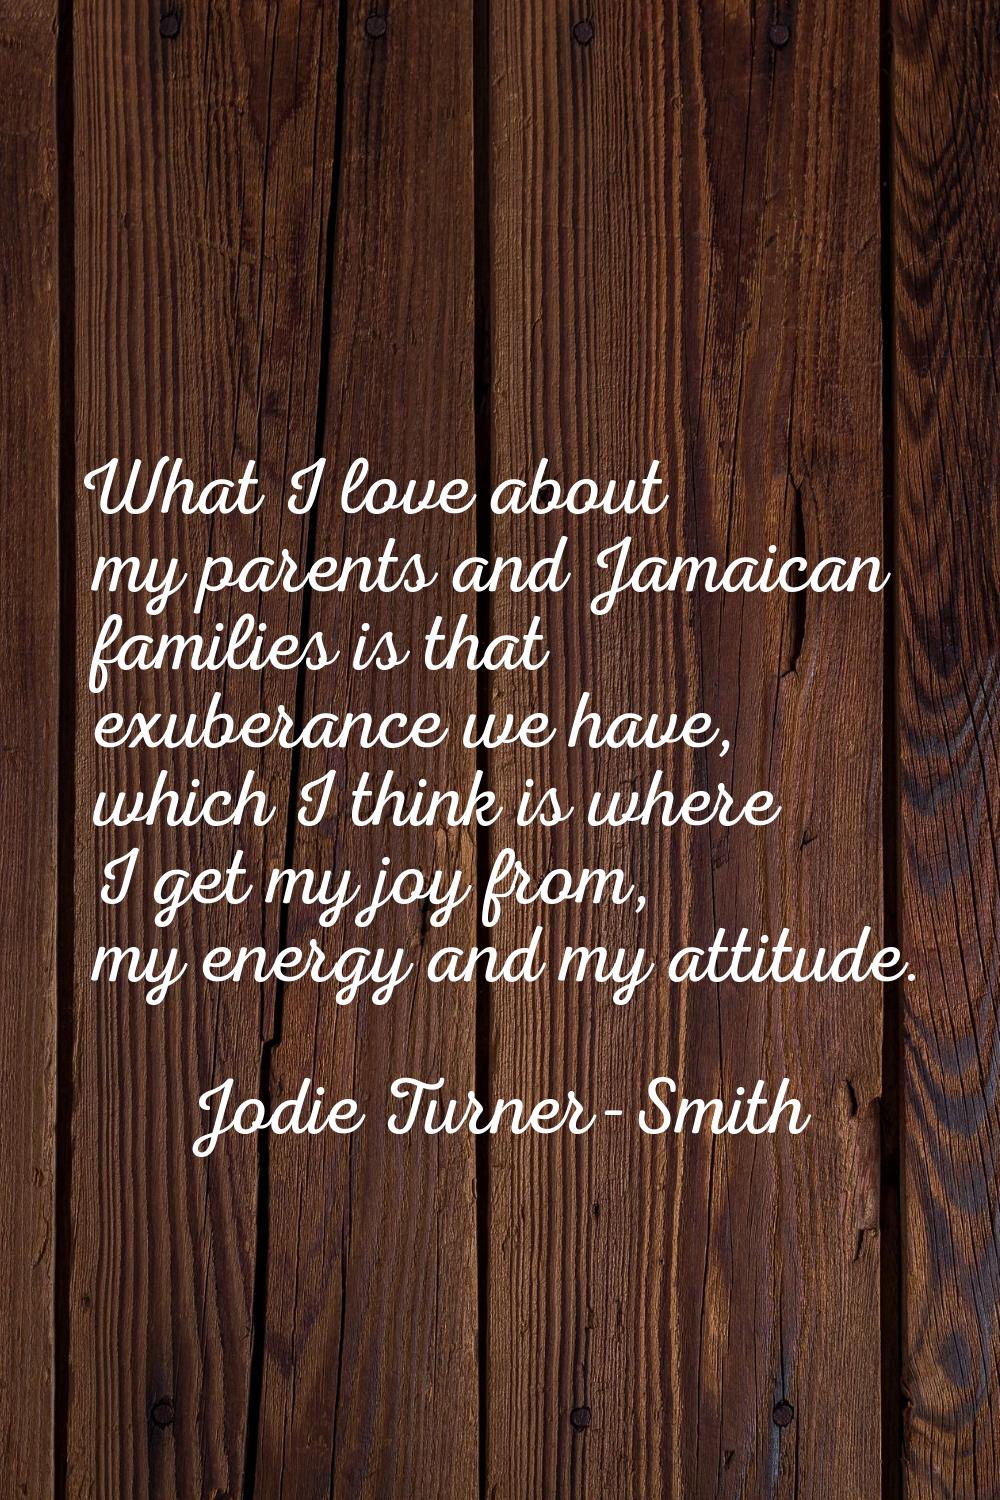 What I love about my parents and Jamaican families is that exuberance we have, which I think is whe